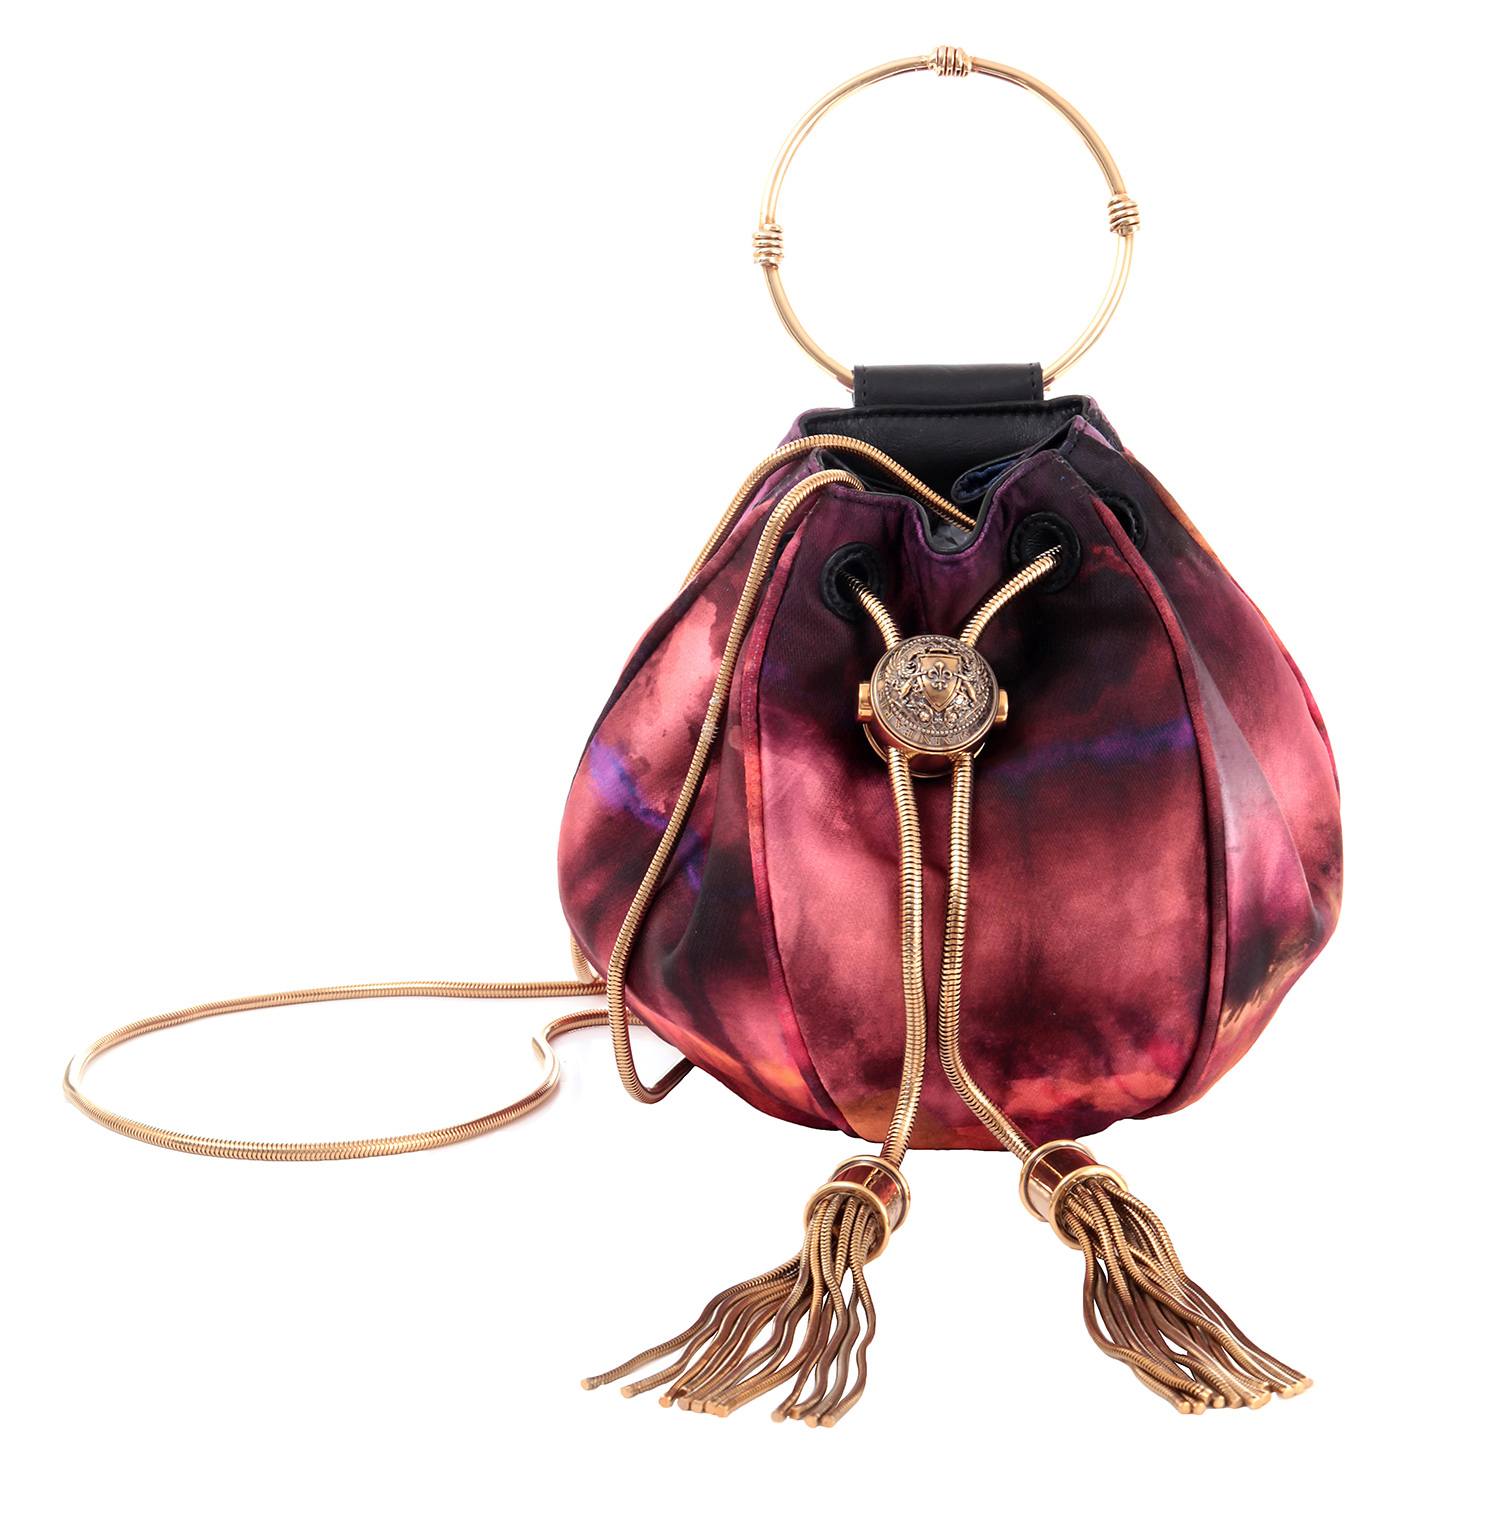 Ruby red satin Balmain mini bucket bag with gold handle and strap